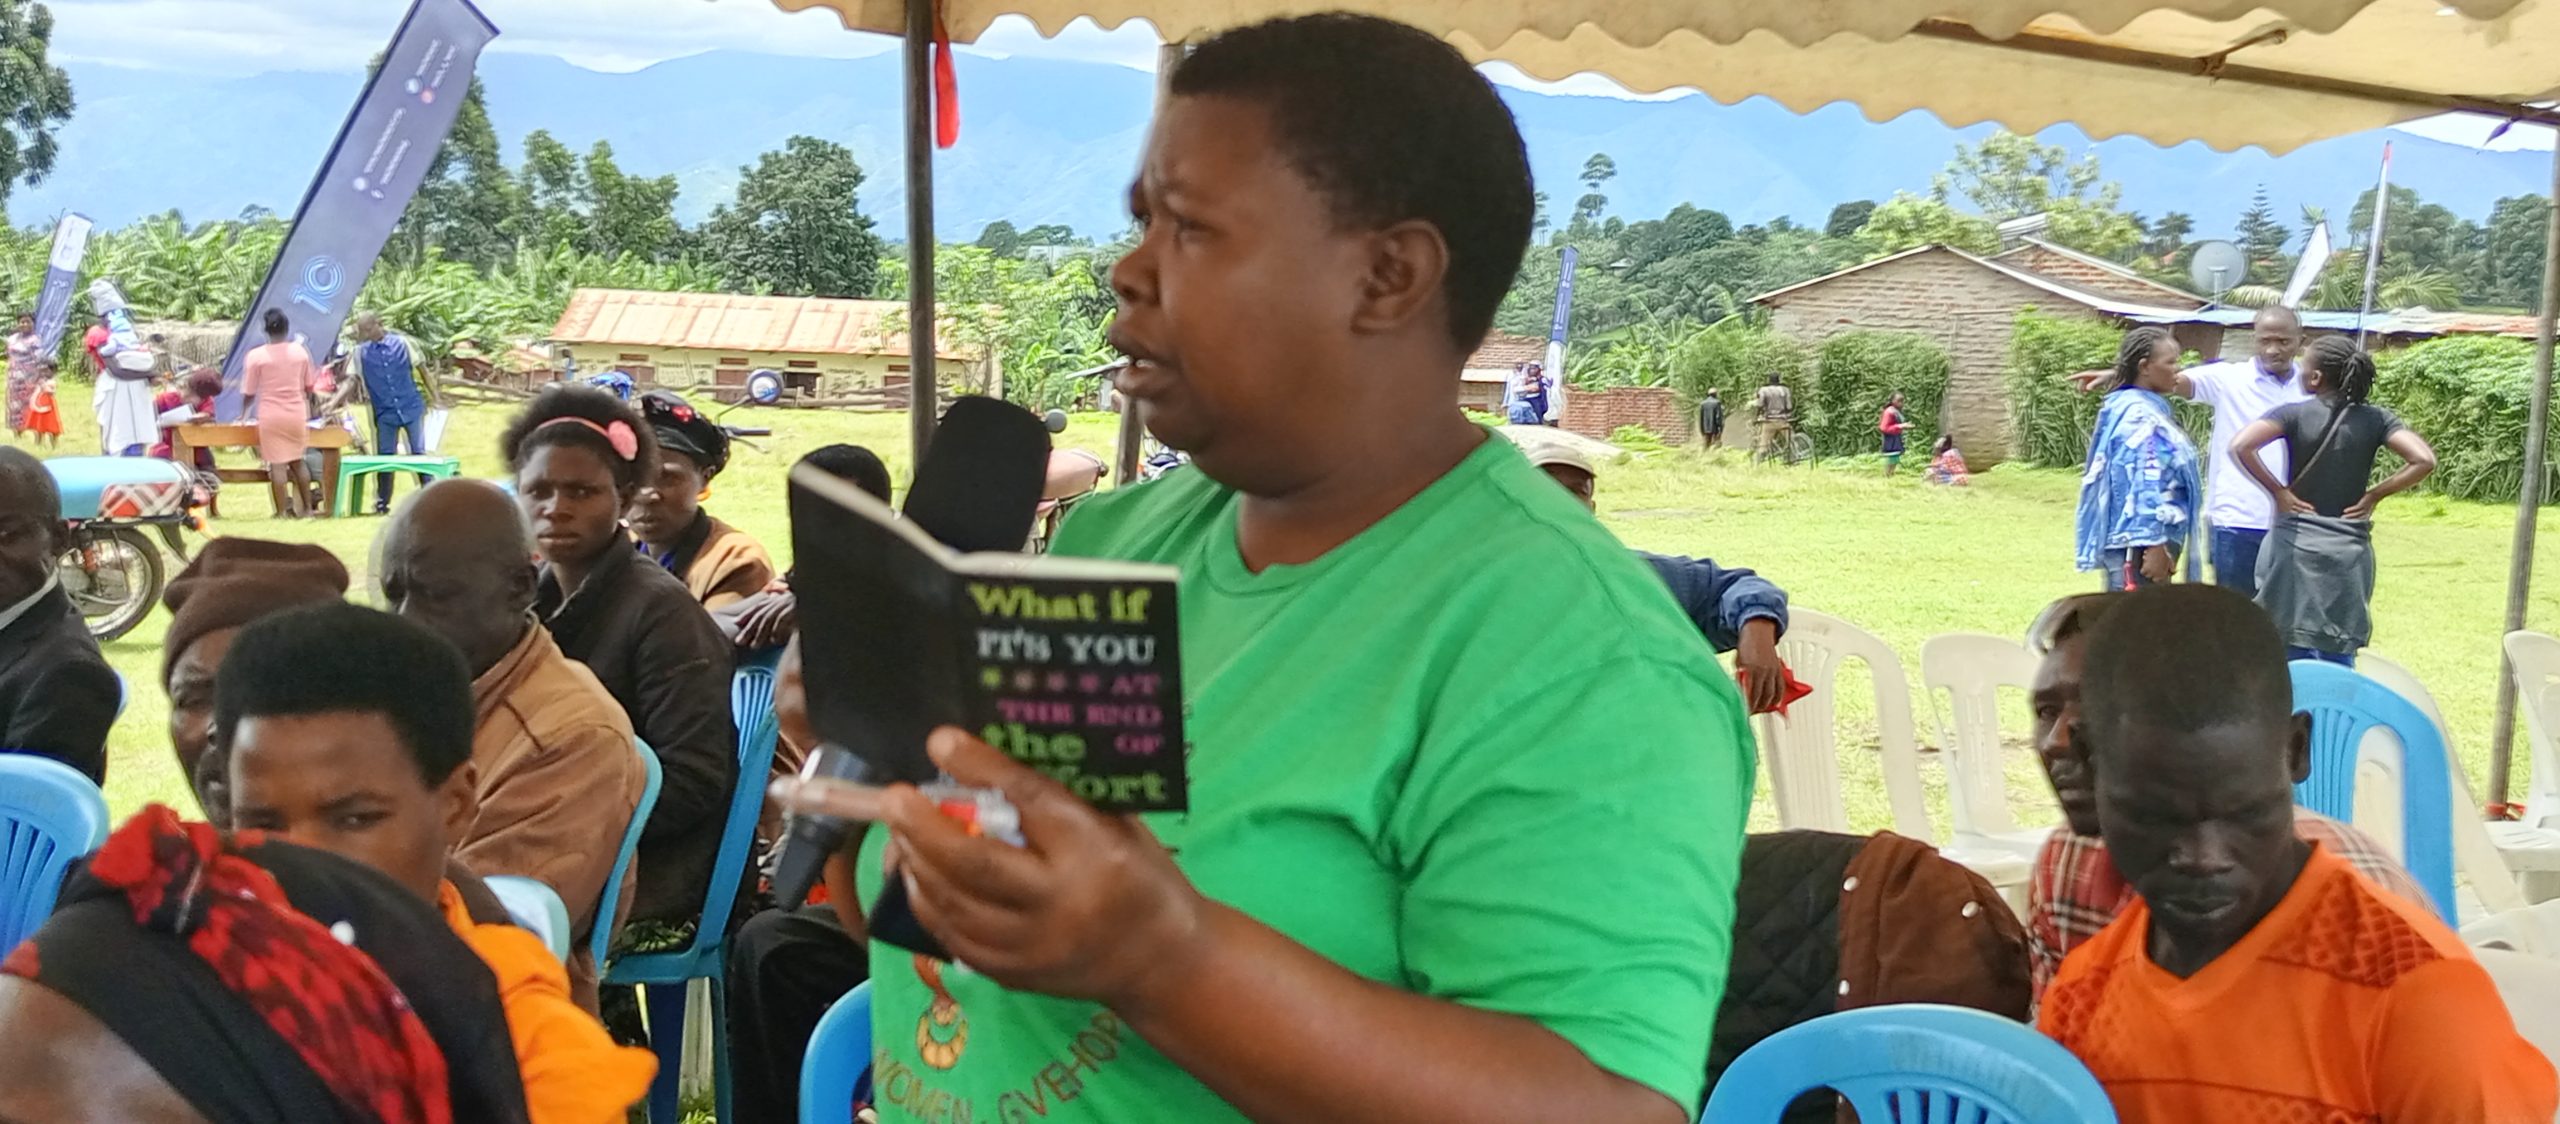 Grace Kengozi speaking during the community dialogue in Kicwamaba sub county